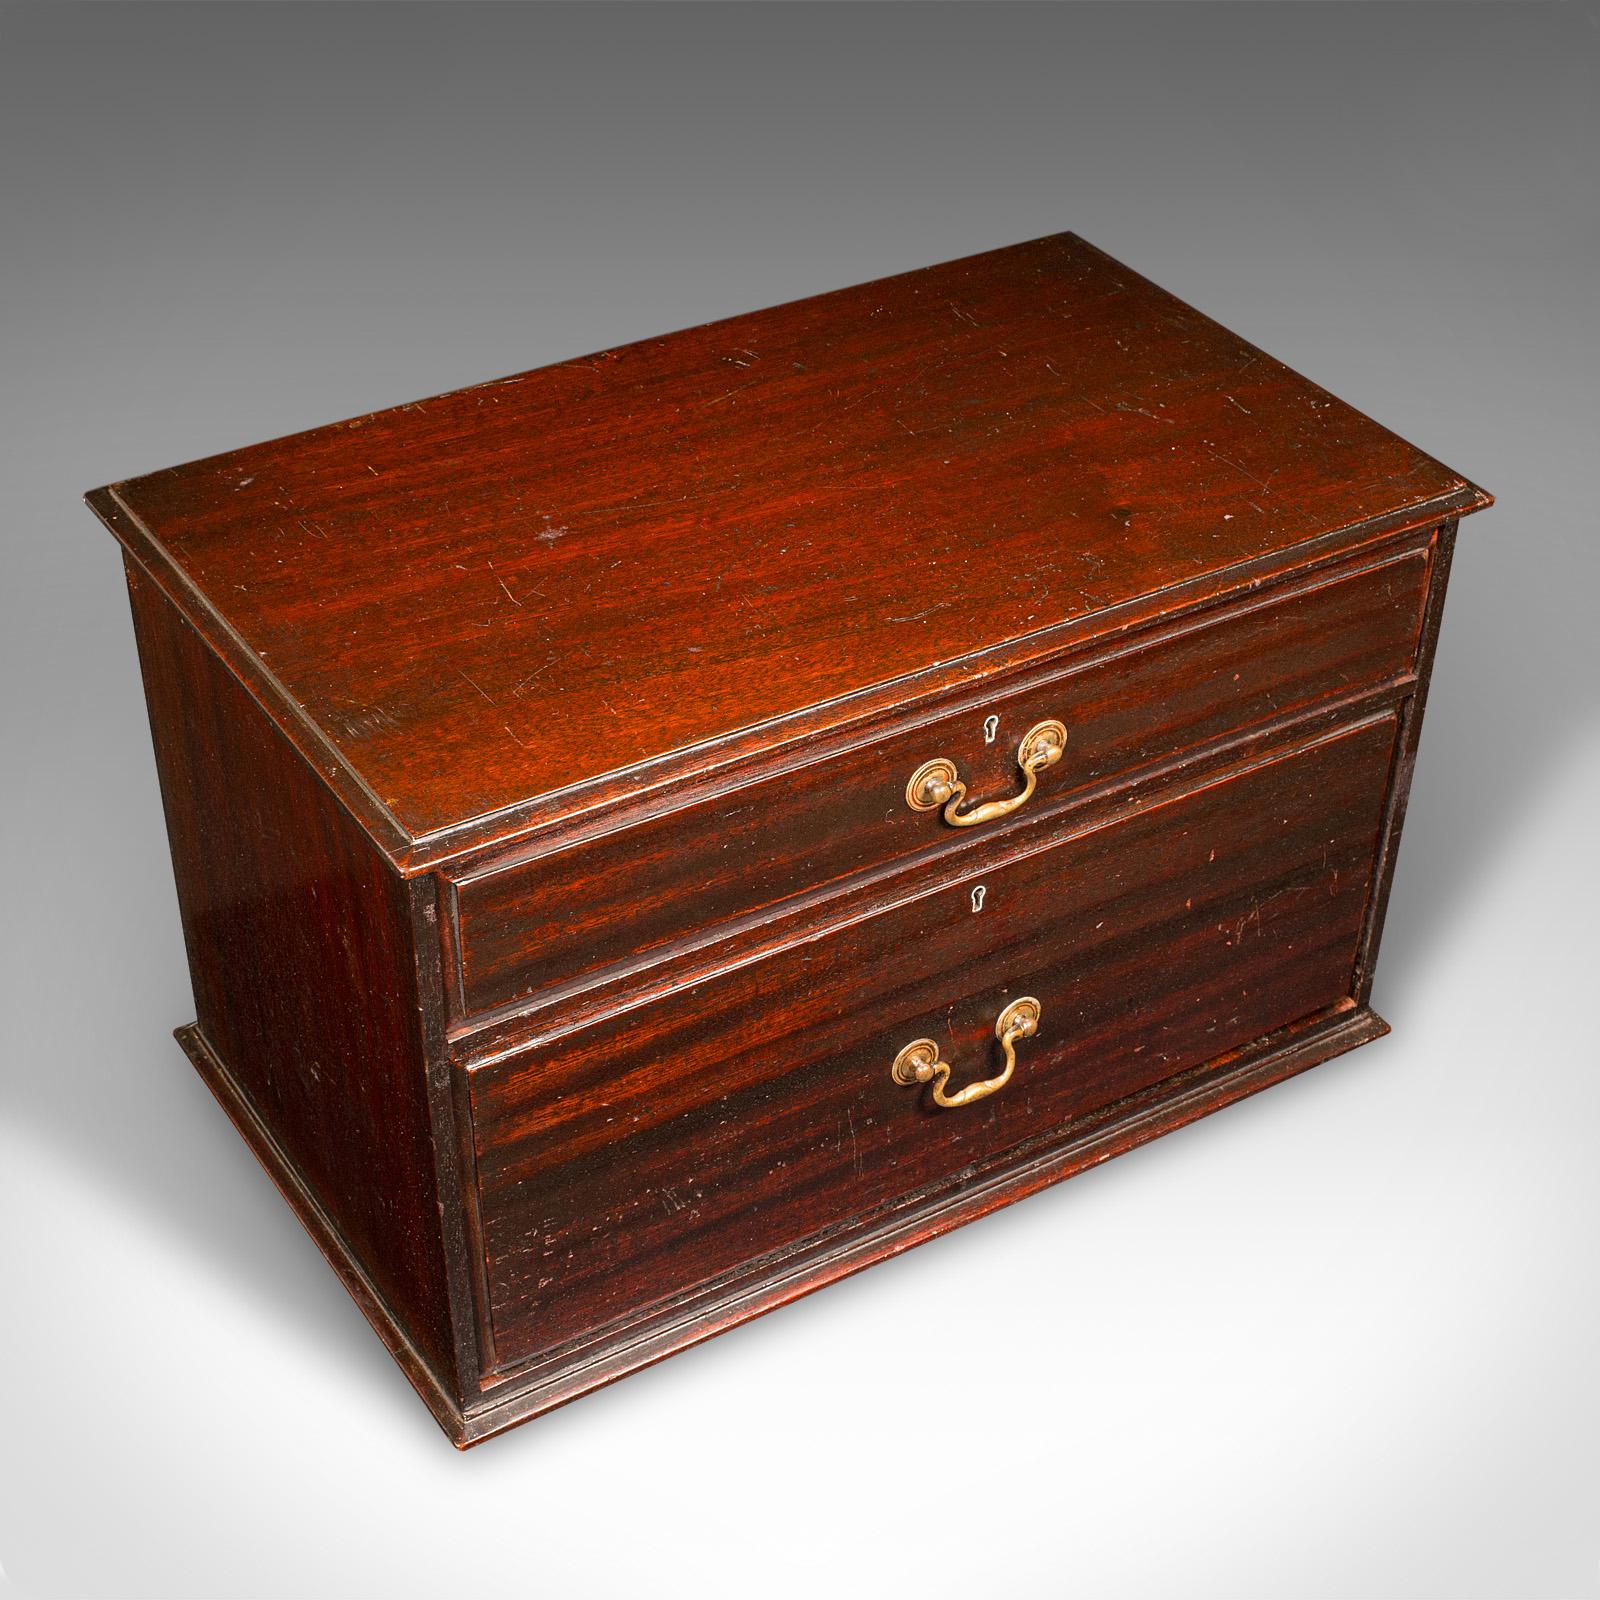 19th Century Antique Watchmaker's Cabinet, English, Tabletop Work Chest, Victorian, C.1860 For Sale